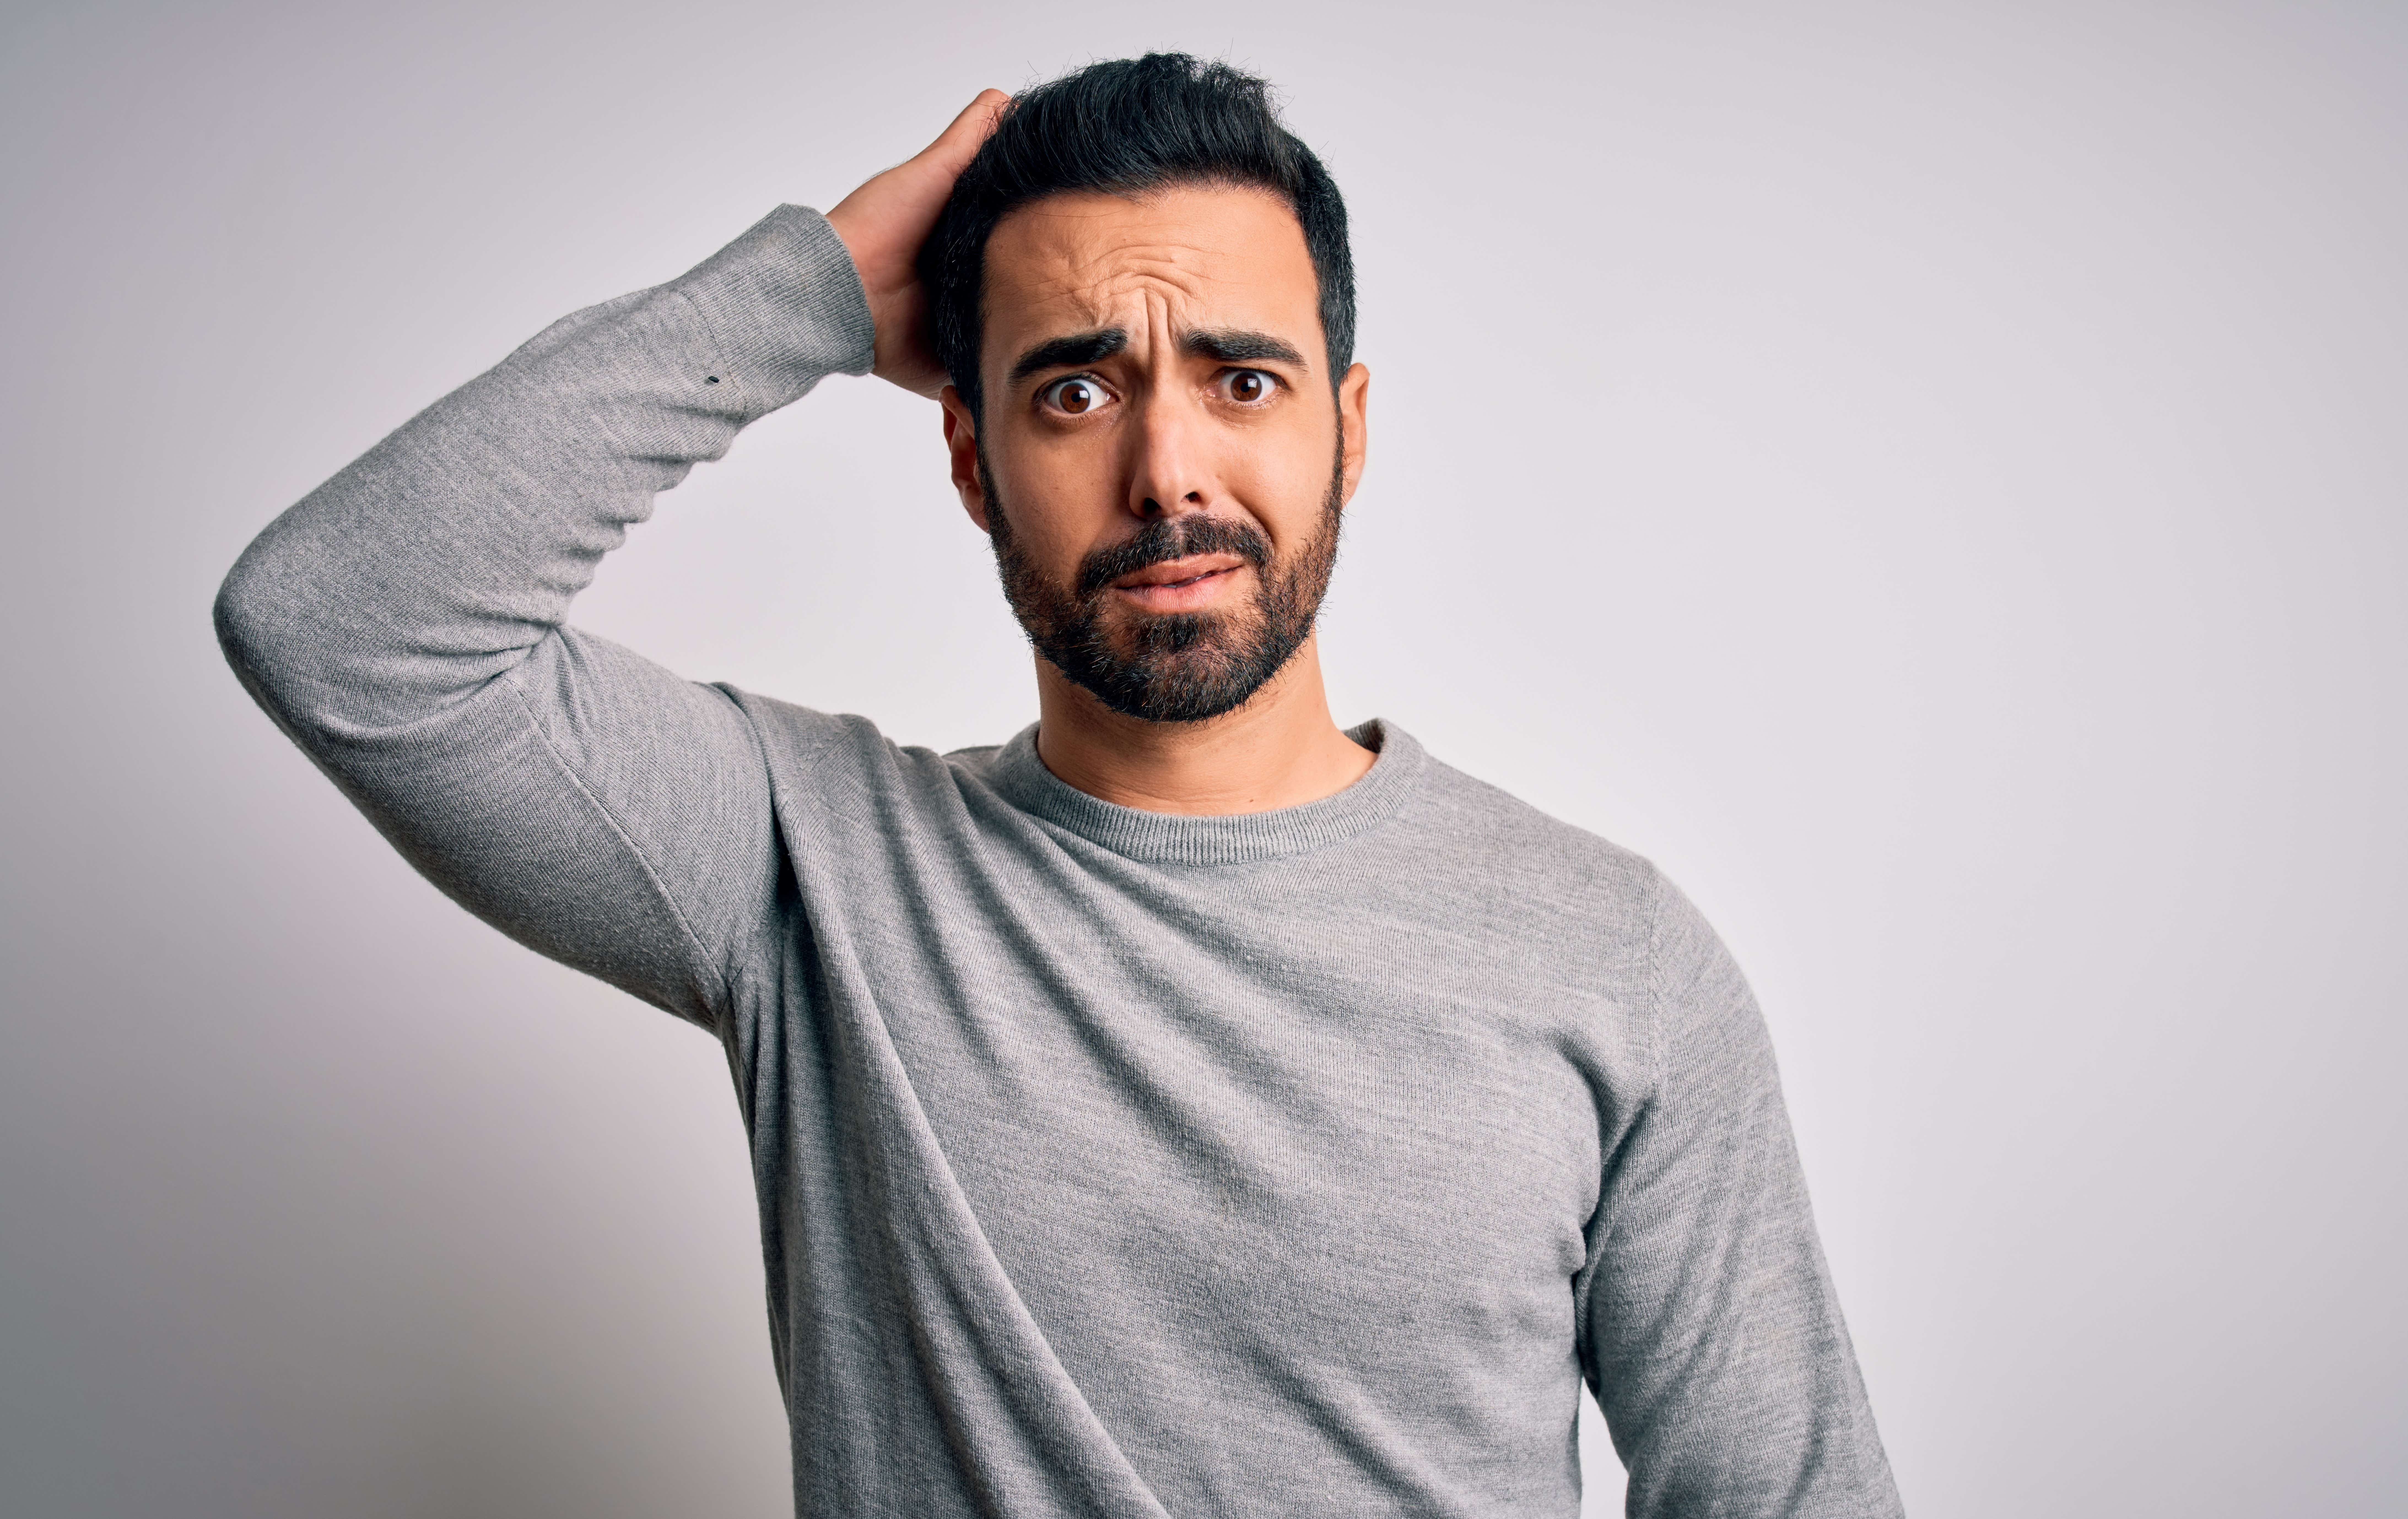 An olive-skinned man with black hair and beard and a grey sweater stands in front of a blank grey wall with his right arm raised behind his head and a look of deep confusion